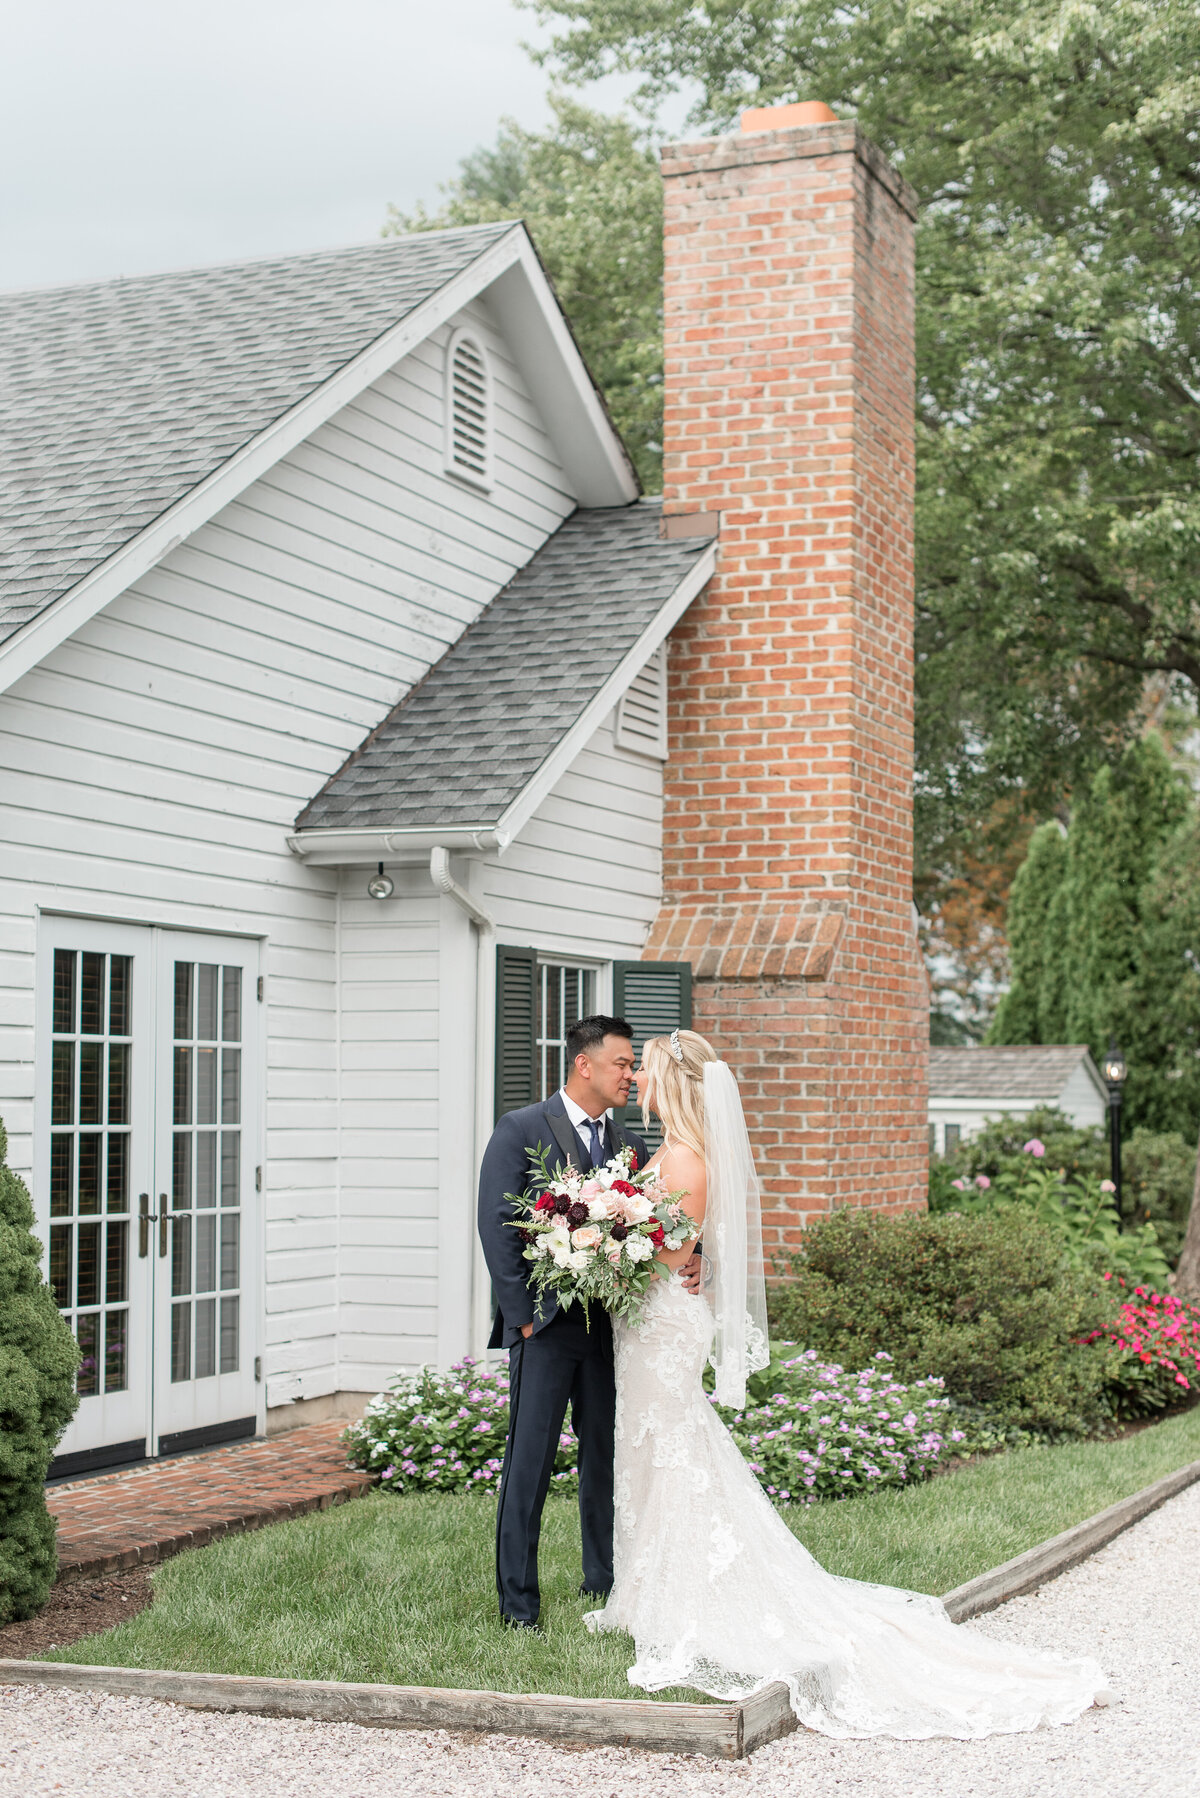 Bride and Groom smiling and almost kissing on grass outside house at Antrim 1844 in Taneytown, Maryland.